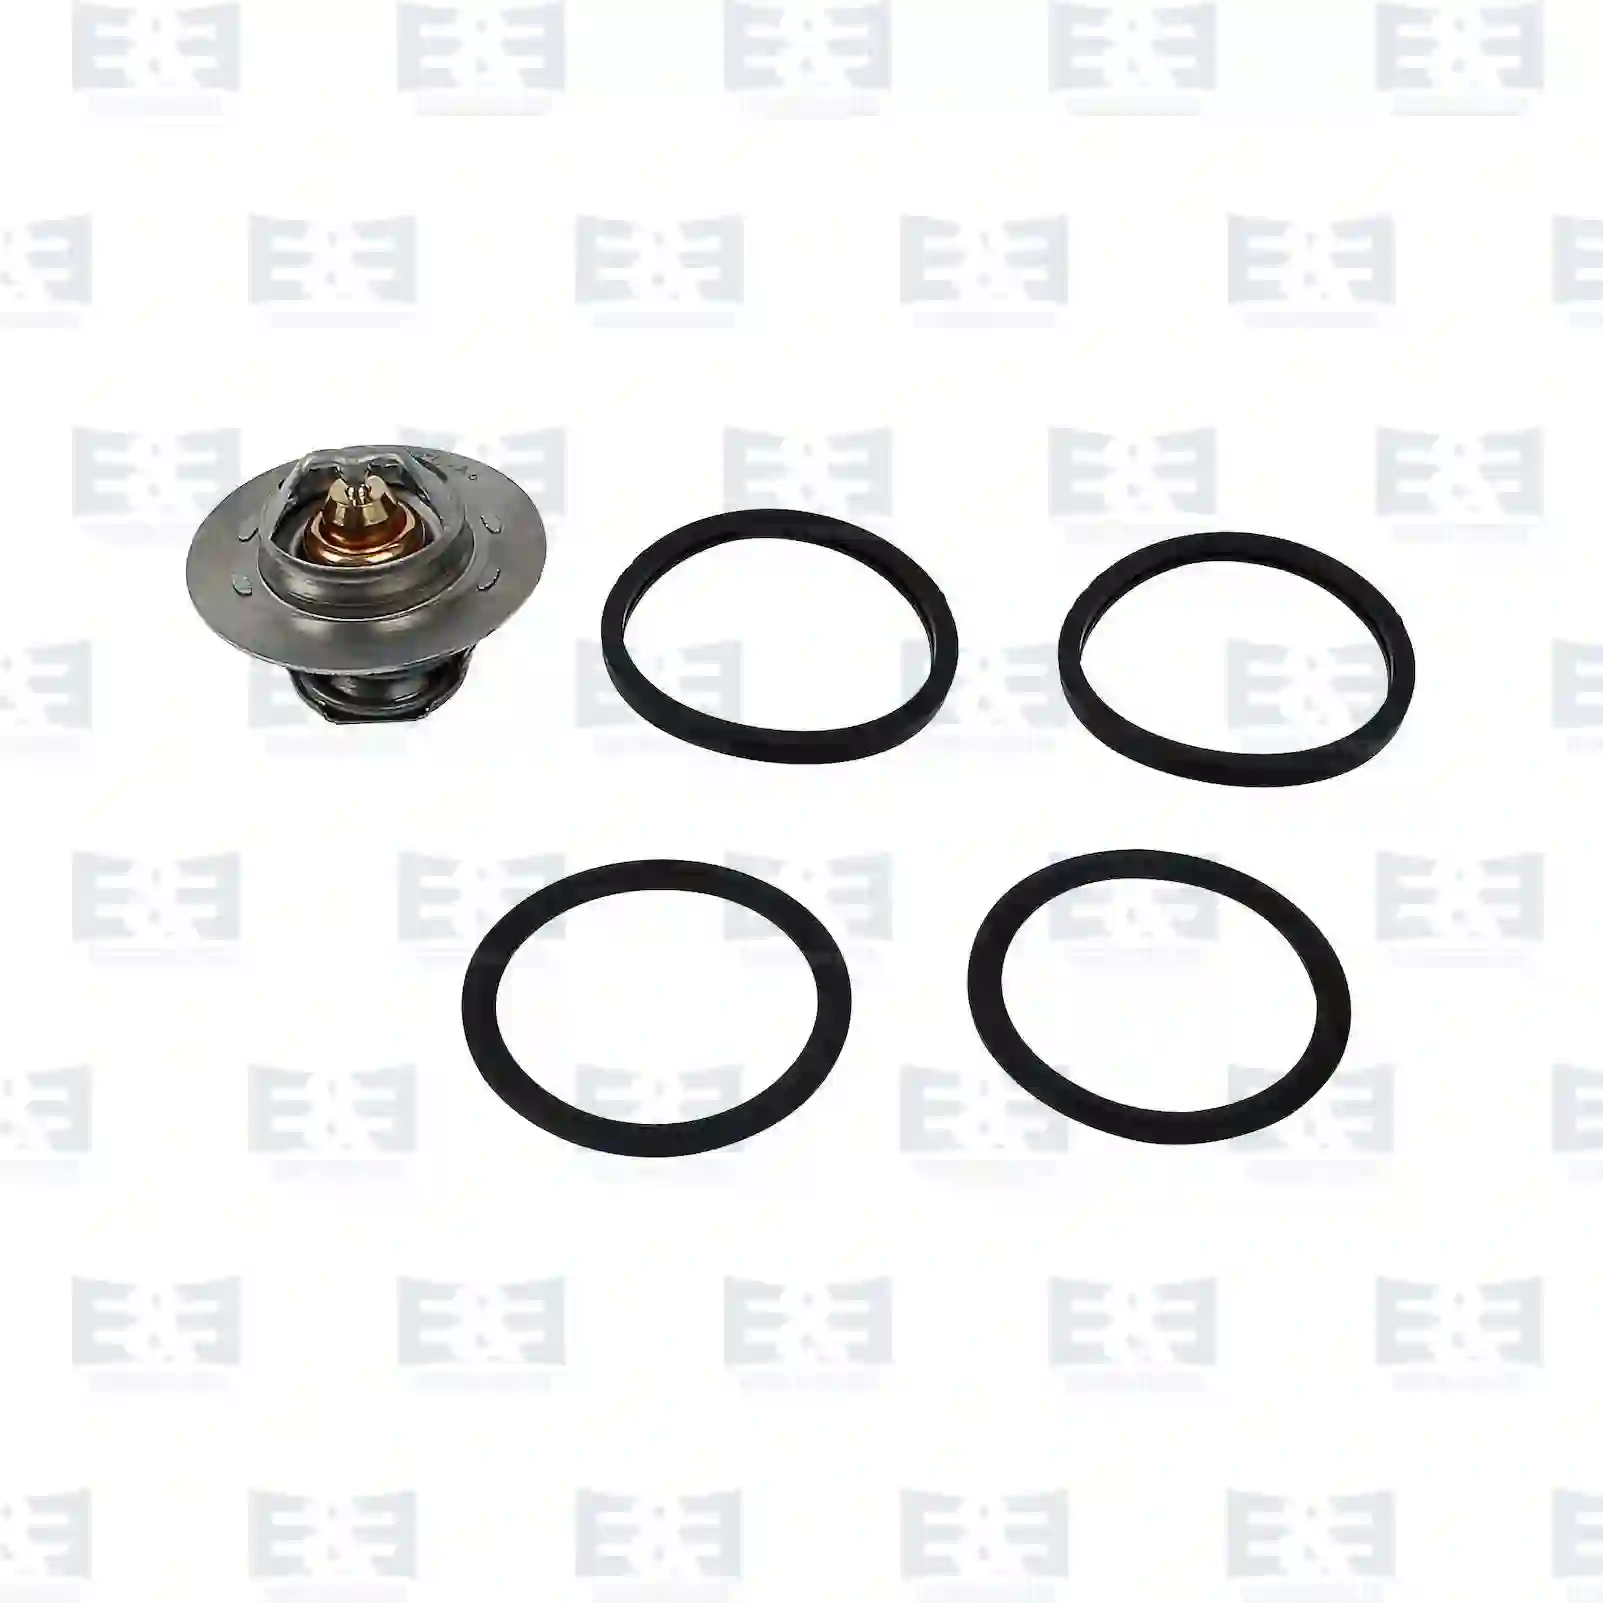 Thermostat Thermostat, EE No 2E2203021 ,  oem no:105000106400, 105000106401, 0000133811, 133727, 133730, 133811, 133827, 133837, 133844, 133883, 7690014319, 7910011101, 7910011880, 7910014390, 7910016560, 9604914680, 9605028680, 9605708780, 9605713680, 9617178080, 9619637980, 188586, 9605028680, 9617178080, 00133730, 00133844, 04154312, 04154313, 95588361, 9604915680, 9605028680, 9617178080, 96050286, 4402719, 9110719, 25500-22600, 00133844, 9605028680, 9617178080, 96050286, ETC4765, 95588361, RF0199152, M474877, M863985, 21200-99B12, 21200-99B13, 21200-A3005, 21200-P6500, 1338018, 1338041, 1338055, 1338056, 1572337, 4402719, 6397295, 0000133811, 133727, 133730, 133811, 133827, 133837, 133844, 133883, 7690014319, 7910011101, 7910011880, 7910014390, 7910016560, 9604914680, 9605028680, 9605708780, 9605713680, 9617178080, 9619637980, 7700723945, 7700730540, 7700735456, 7700866896, 7700872314, 7700966896, 7701035736, 7701348372, 7701348373, 7701349659, 133730, 7701348372, GTS106, 317530100, 133727, 133730, 133844, 30863985, 3287960, 32879603, 3343567, 3344615, 3344616, 3344617, 33446170, 3345628, 33456286, 343567, 3447030, 34470302, 3447032, 3449621, 3473479, 3474877 E&E Truck Spare Parts | Truck Spare Parts, Auotomotive Spare Parts